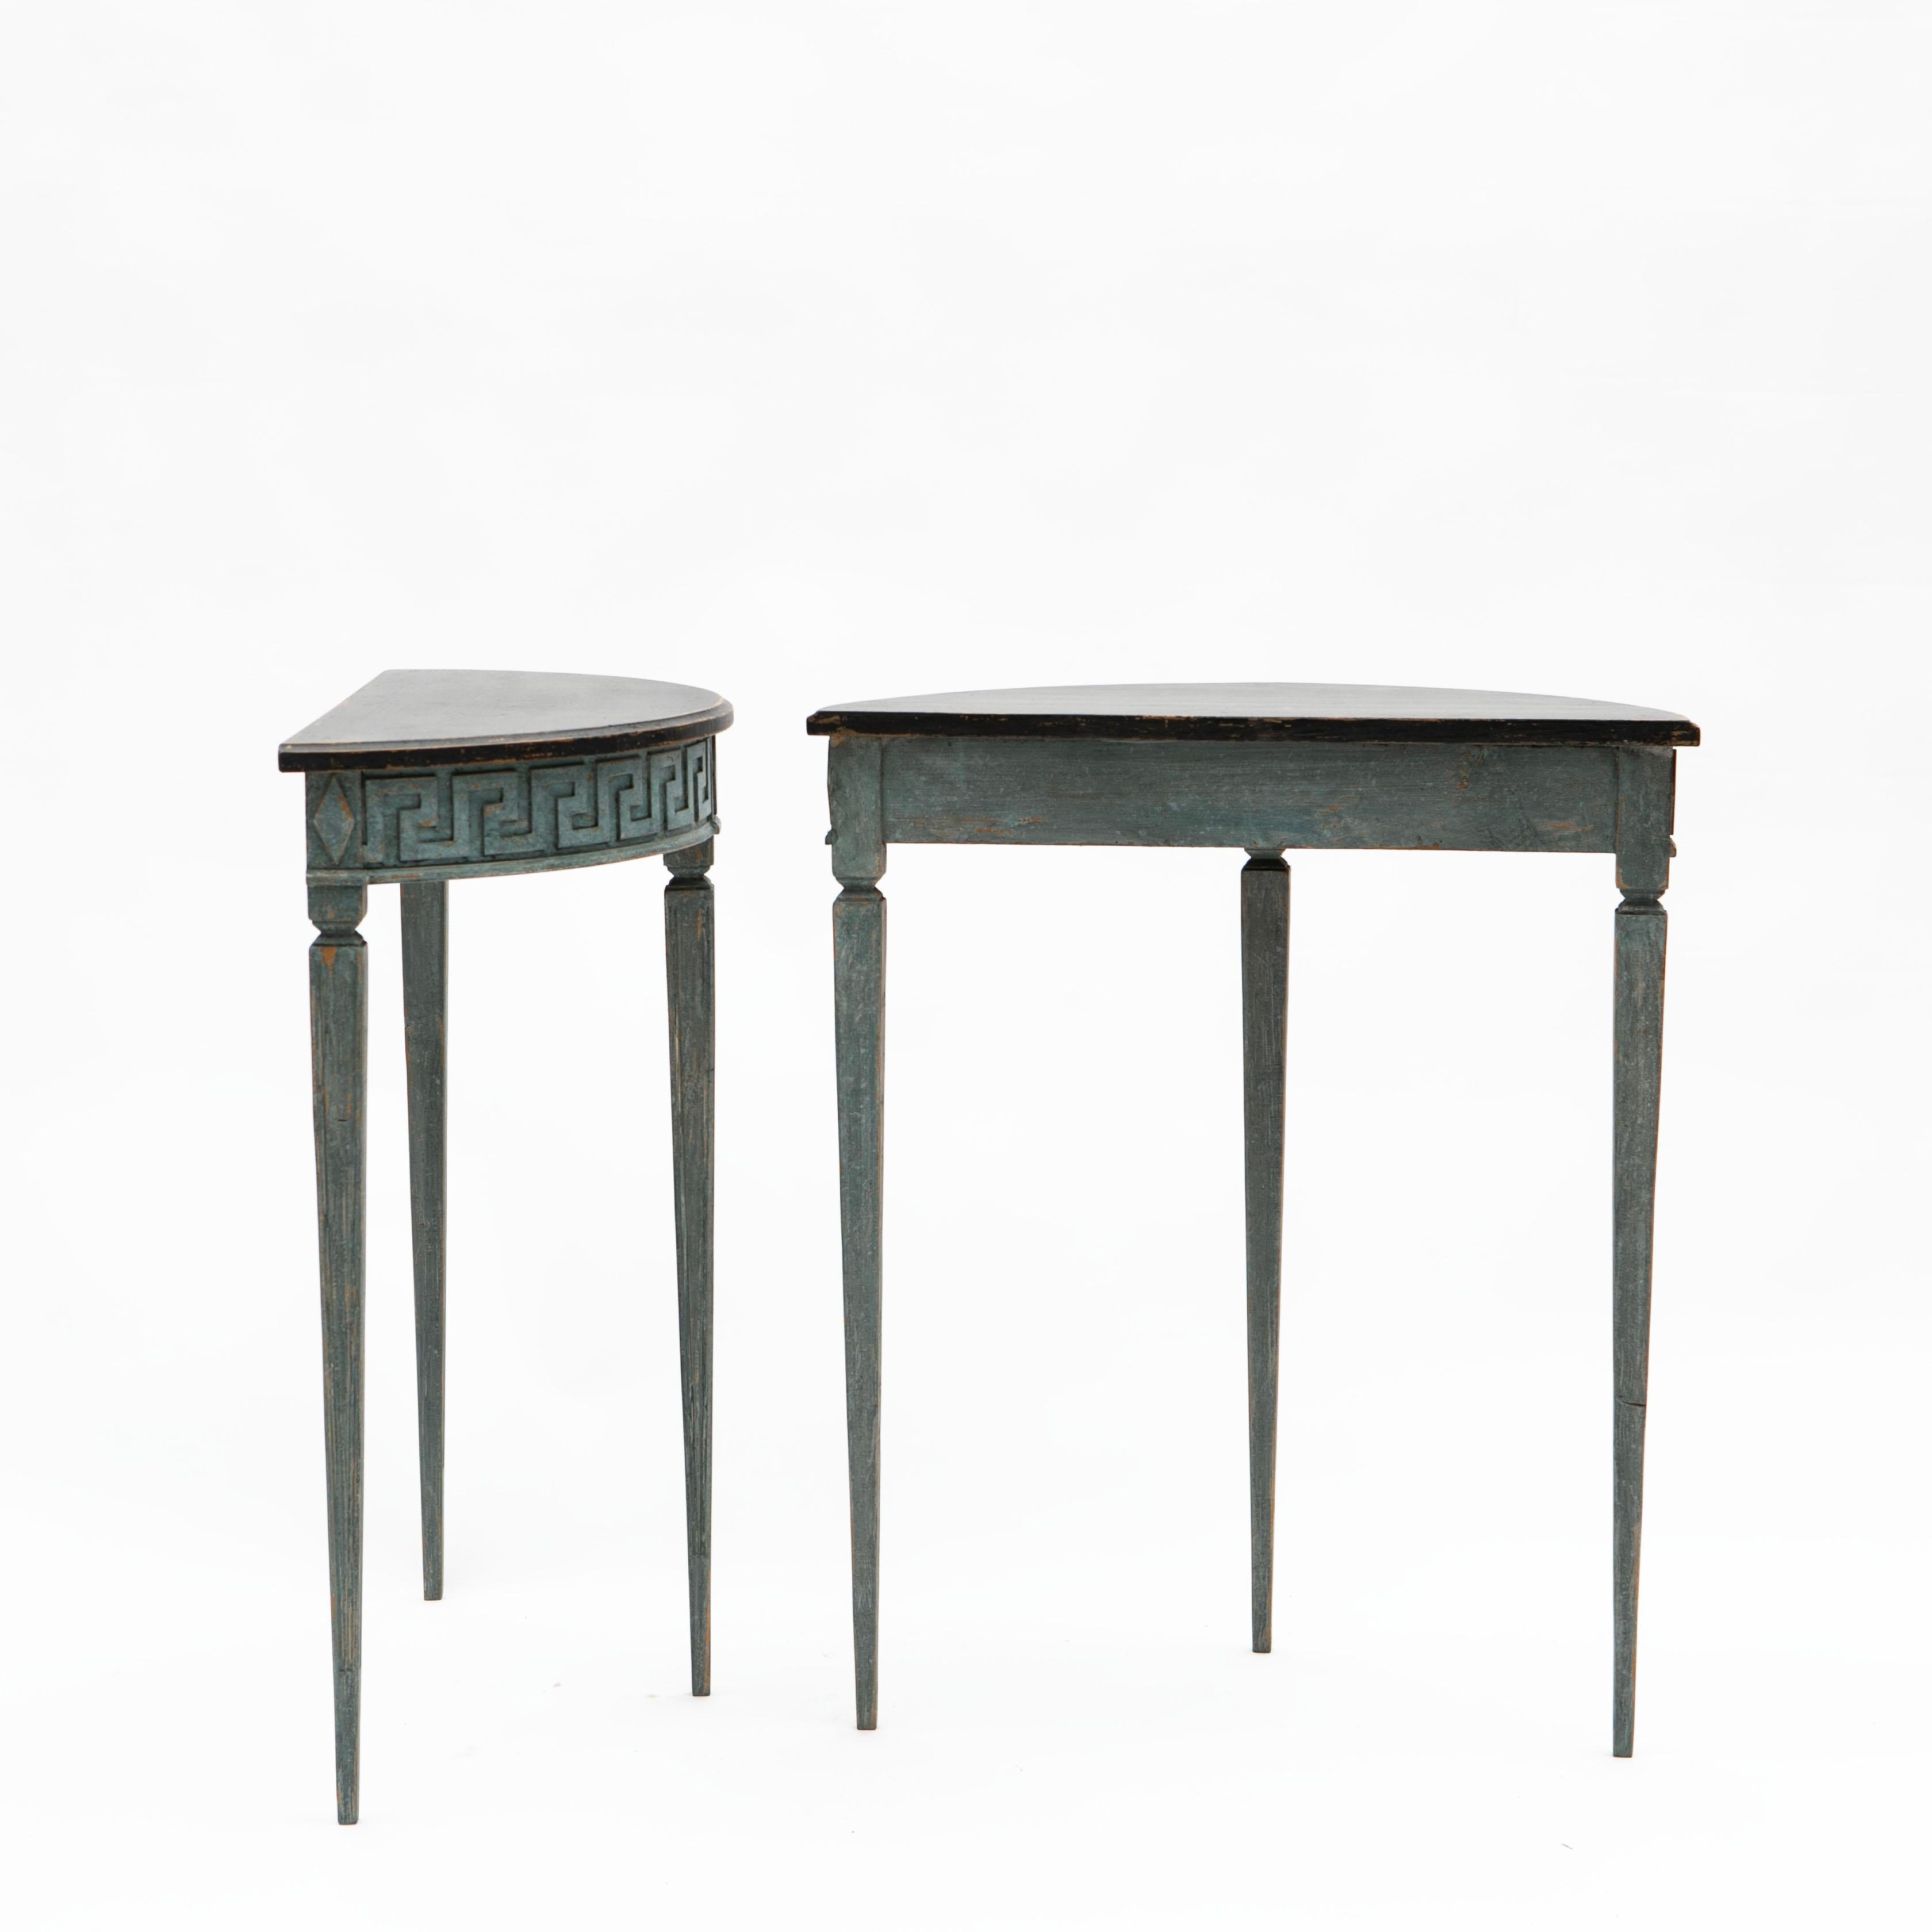 Swedish Pair of Gustavian-Style Demilune Console Tables, Sweden c. 1900